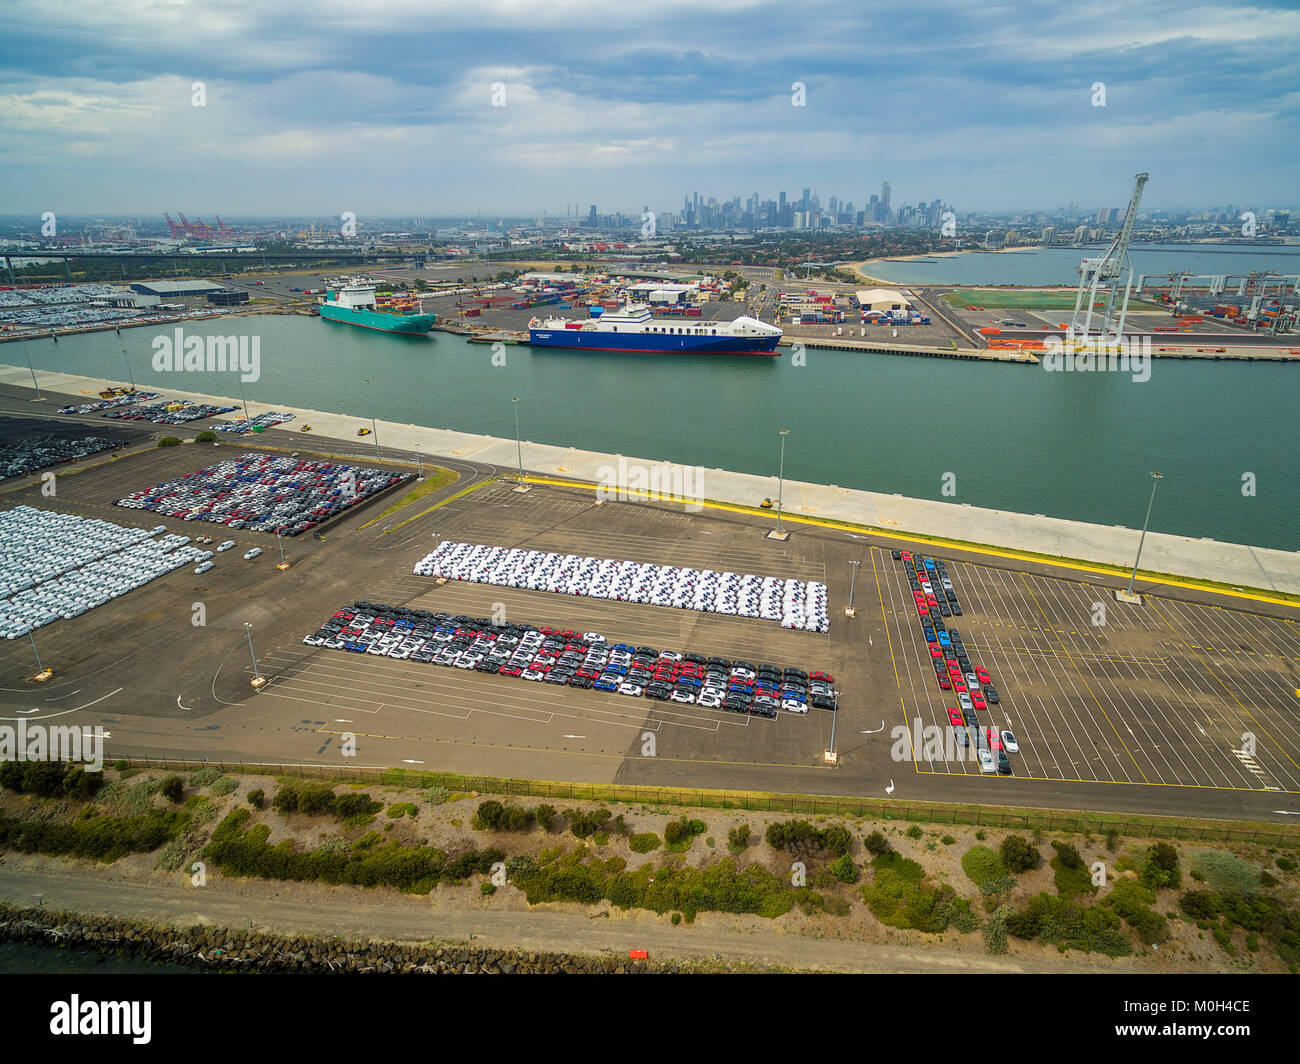 Aerial view of Port Melbourne with moored cargo vessels, imported cars parking lots, and Melbourne CBD skyline on the horizon Stock Photo